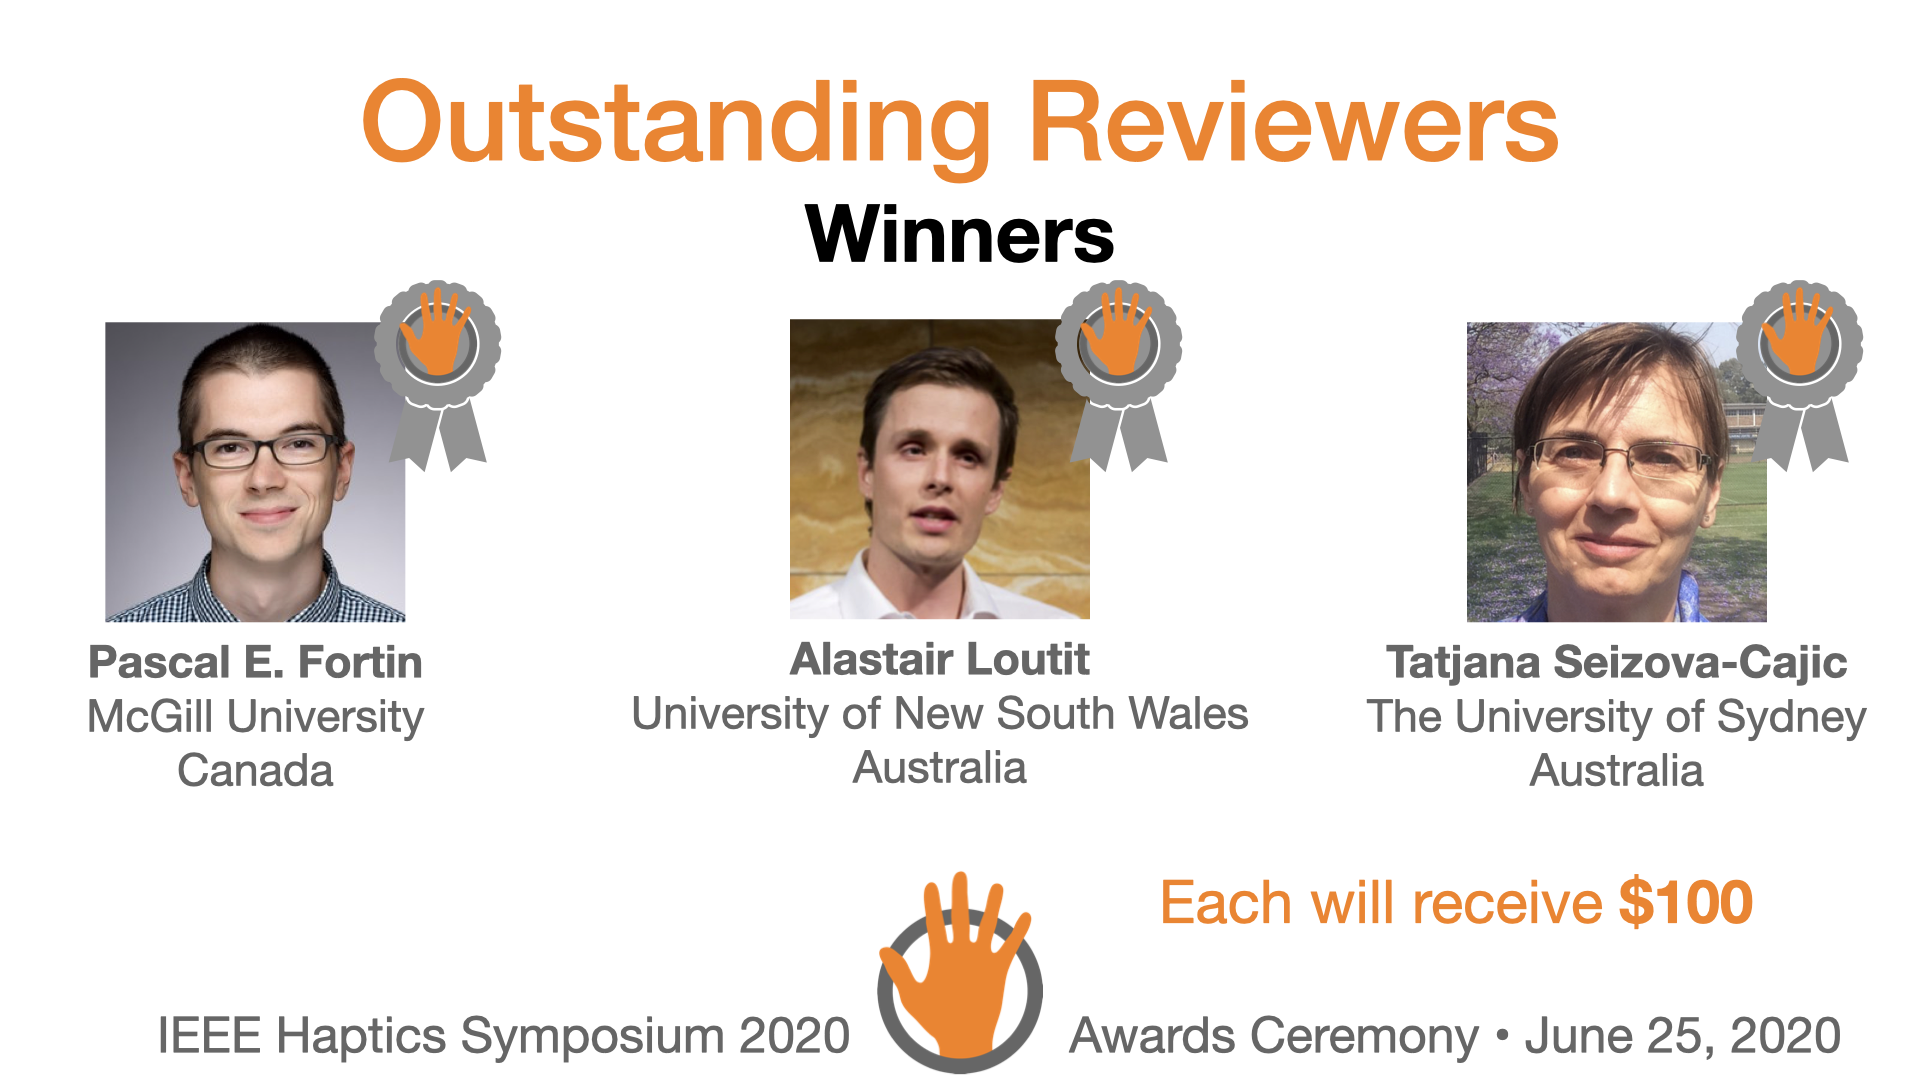 An award slide featuring the three winners of the outstanding reviewers award